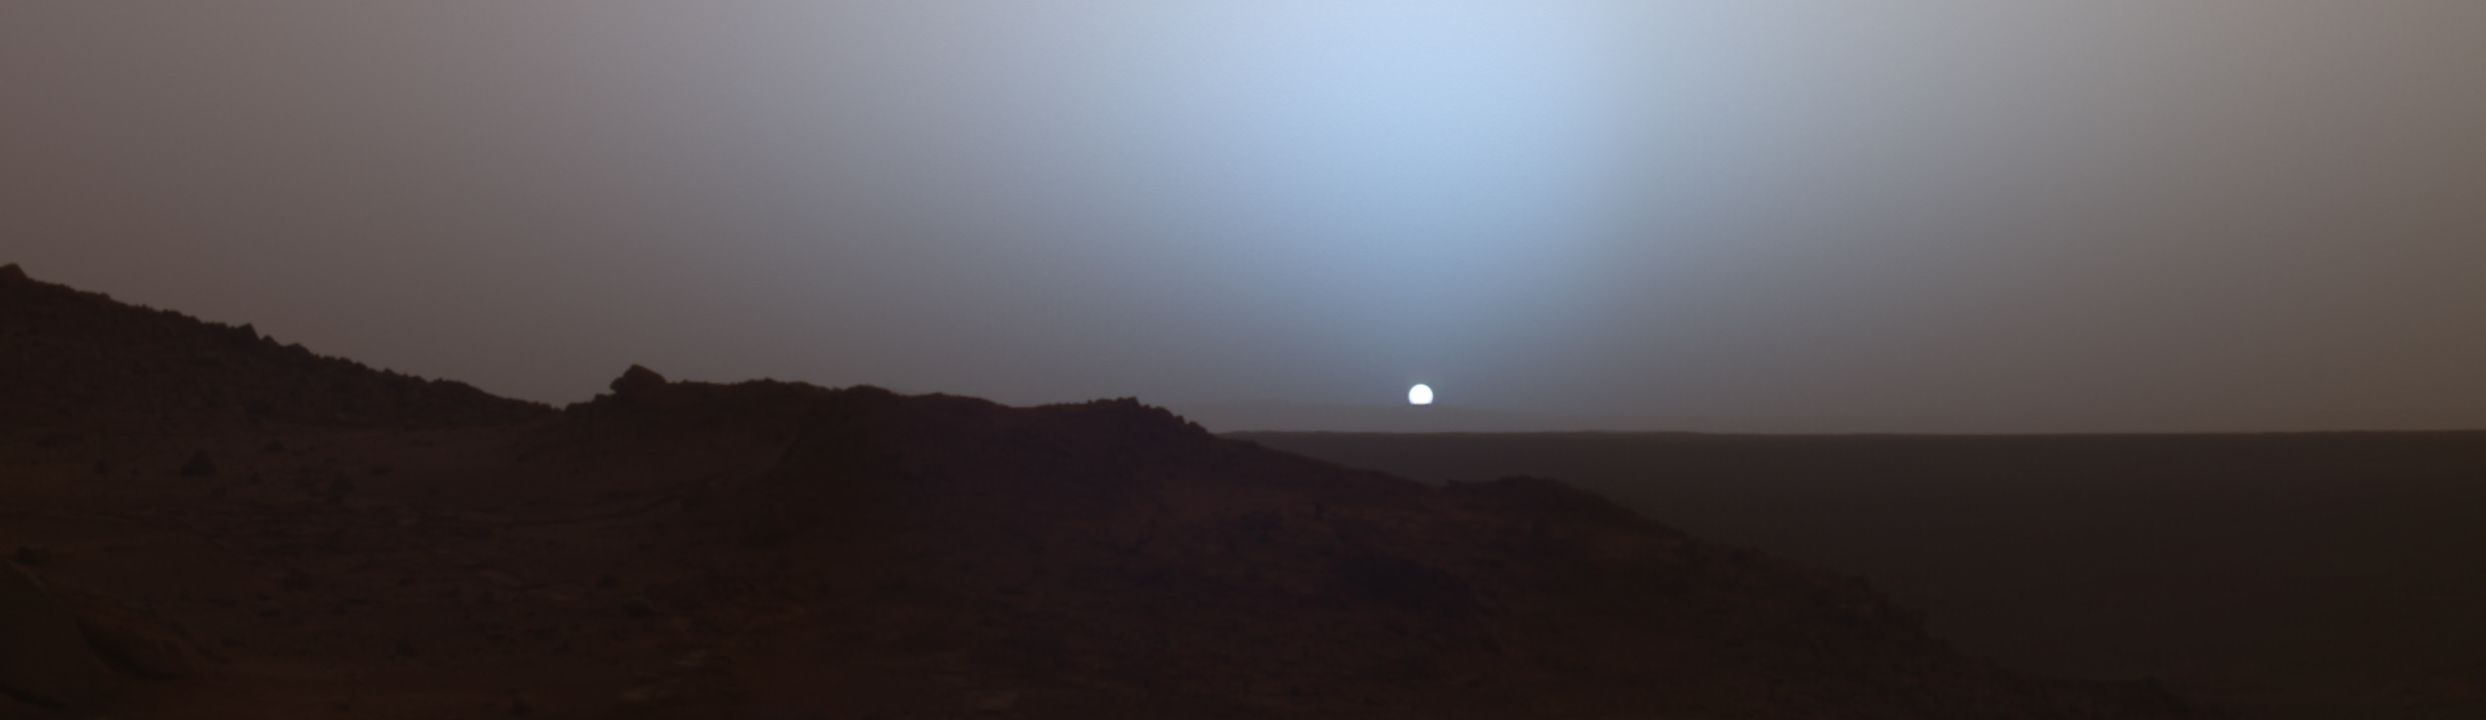 Post Apocalyptic Sunset In Mars 4K
 Wallpapers